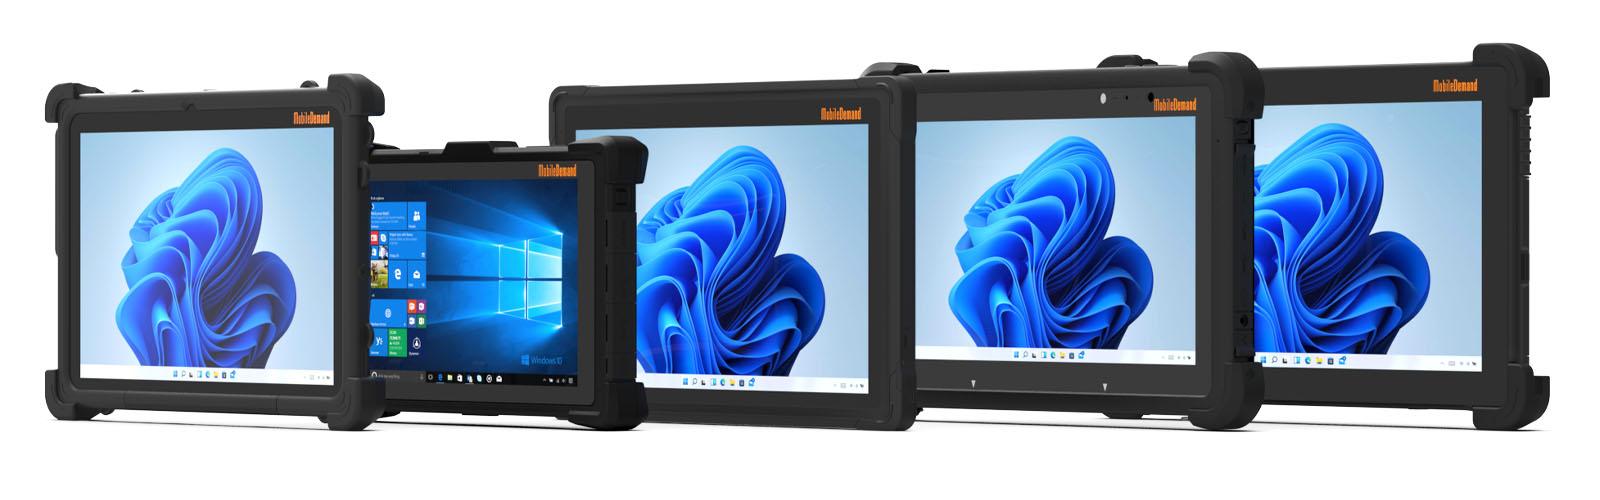 The xTablet family lineup